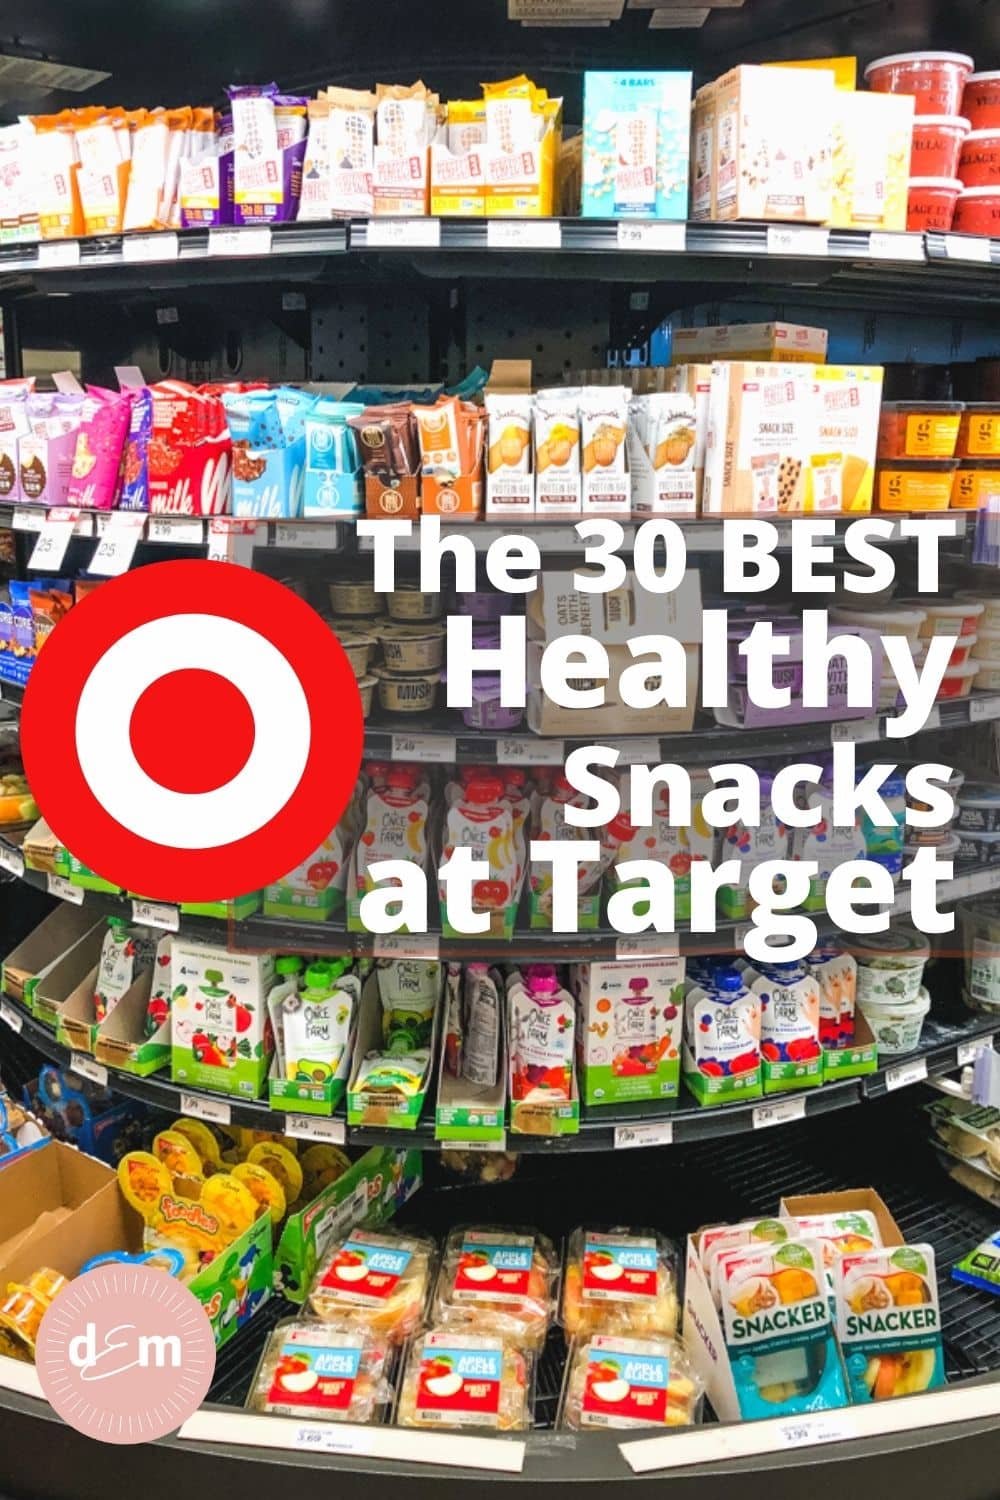 Photo of refrigerated healthy snacks at Target, with txt overlay of The 30 Best Healthy Snacks at Target.